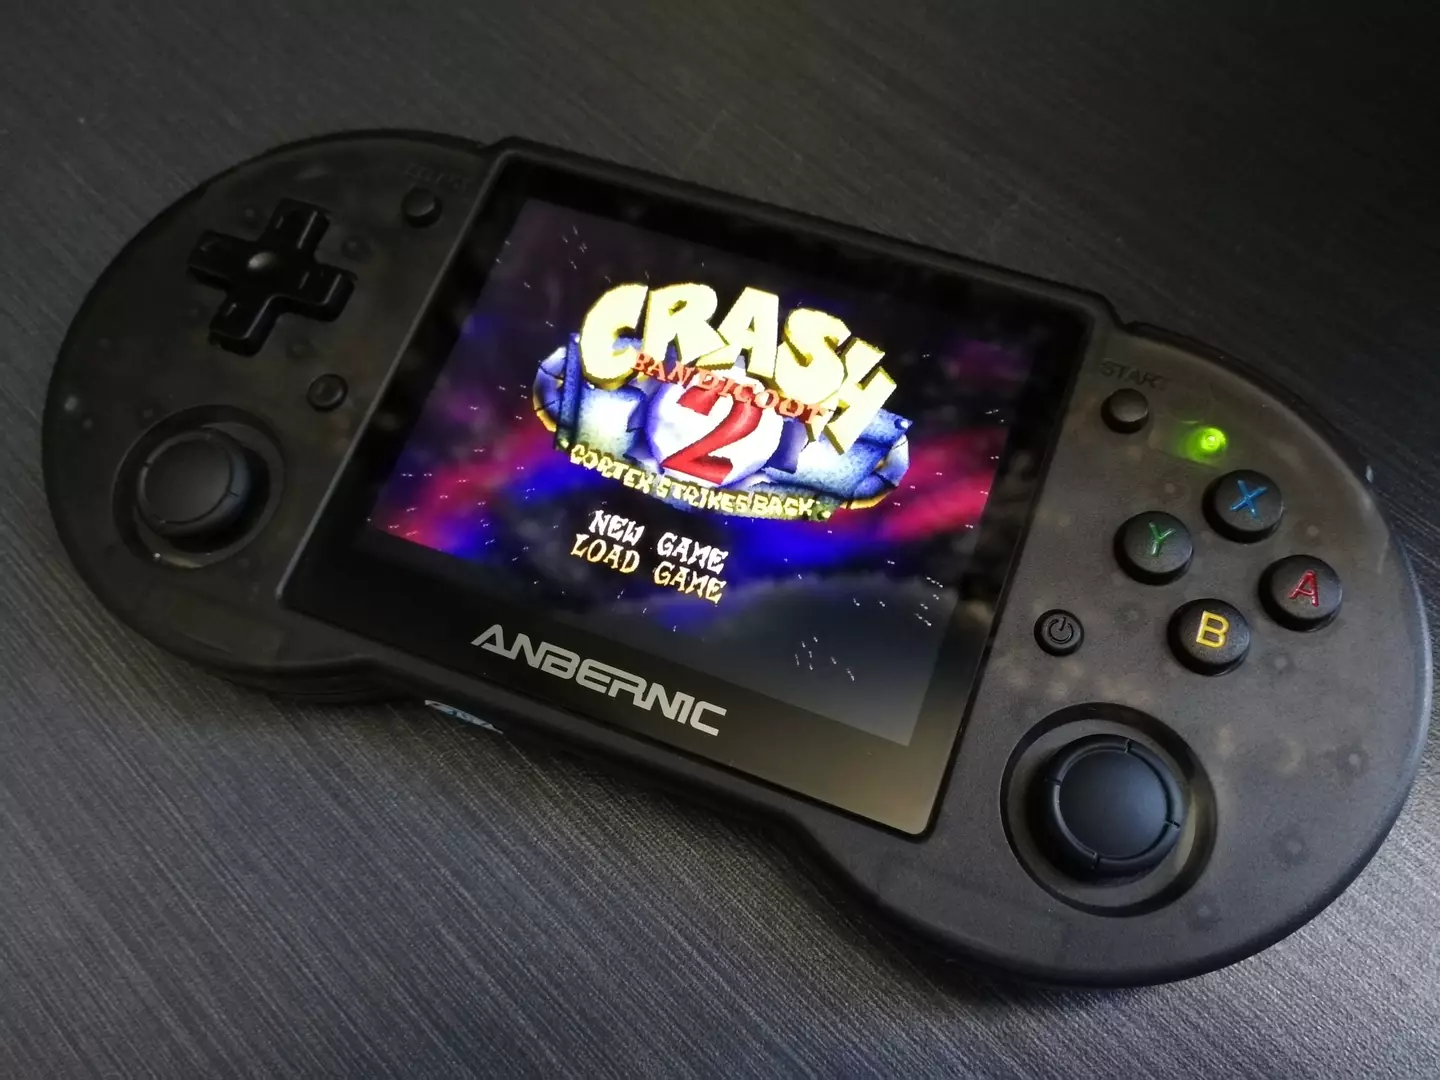 The RG353P easily plays your old PS1 favourites